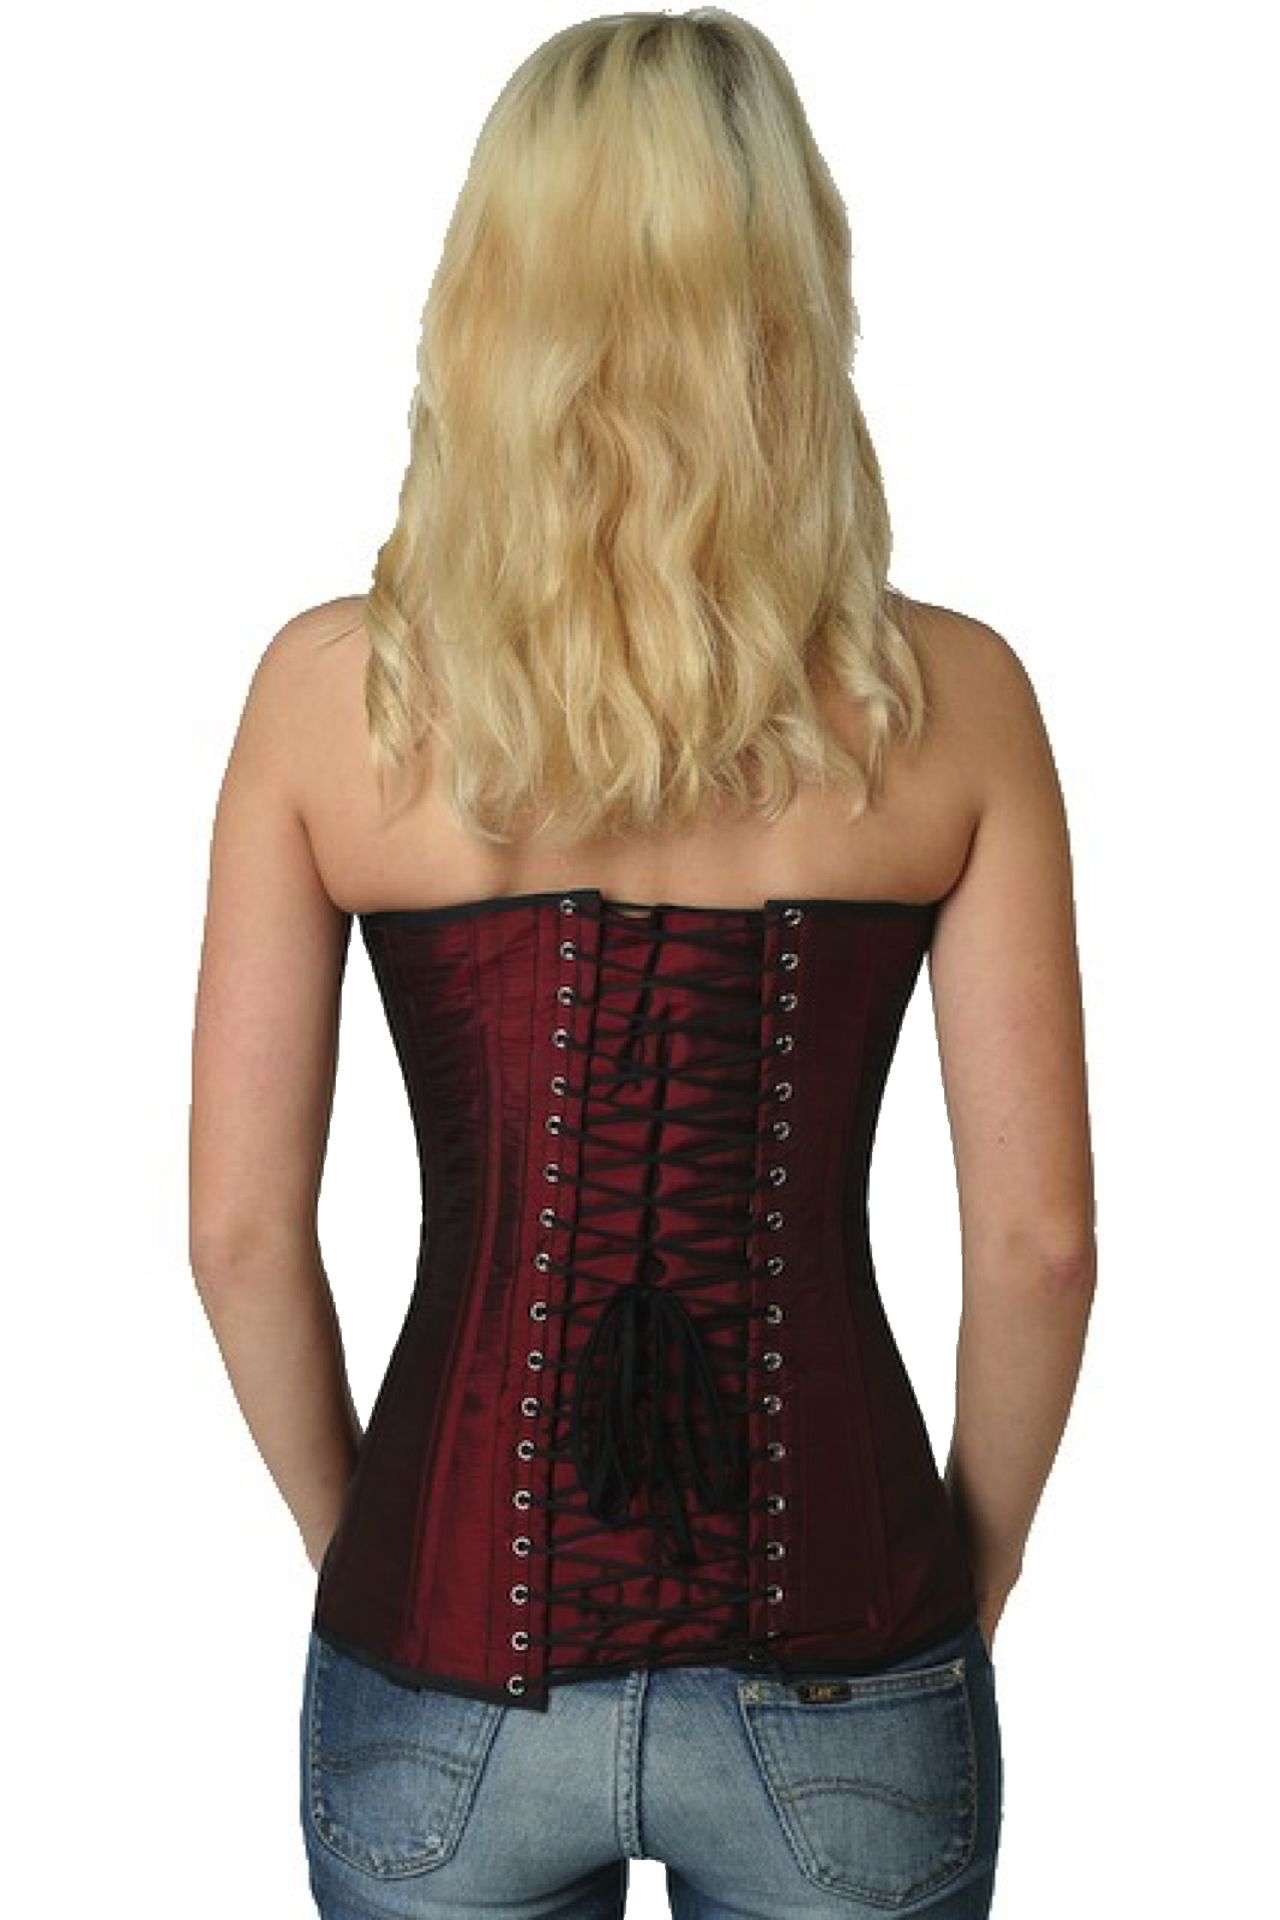 Corset red burgundy satin overbust sy05